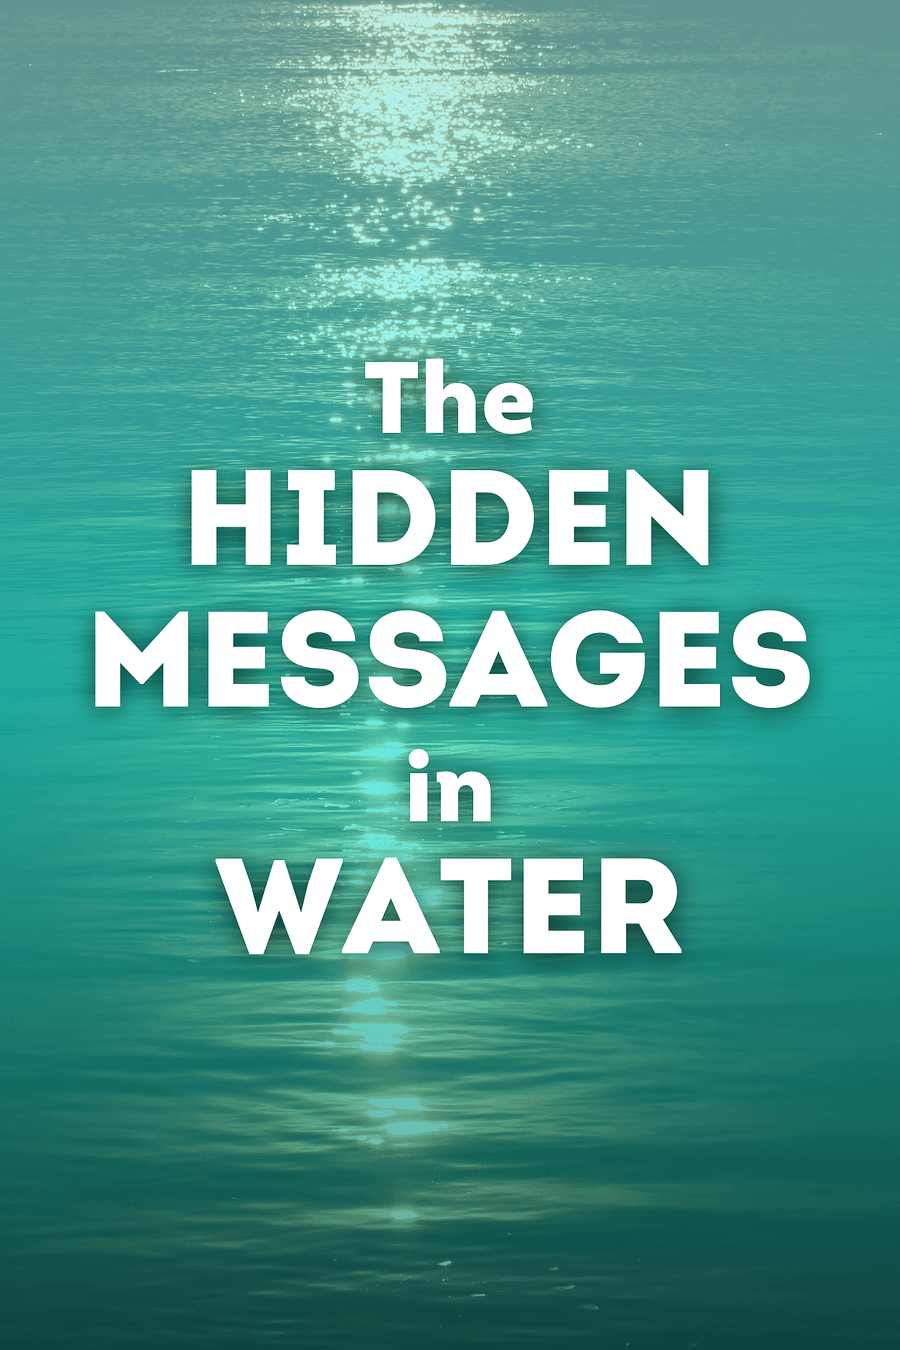 The Hidden Messages in Water by Masaru Emoto - Book Summary